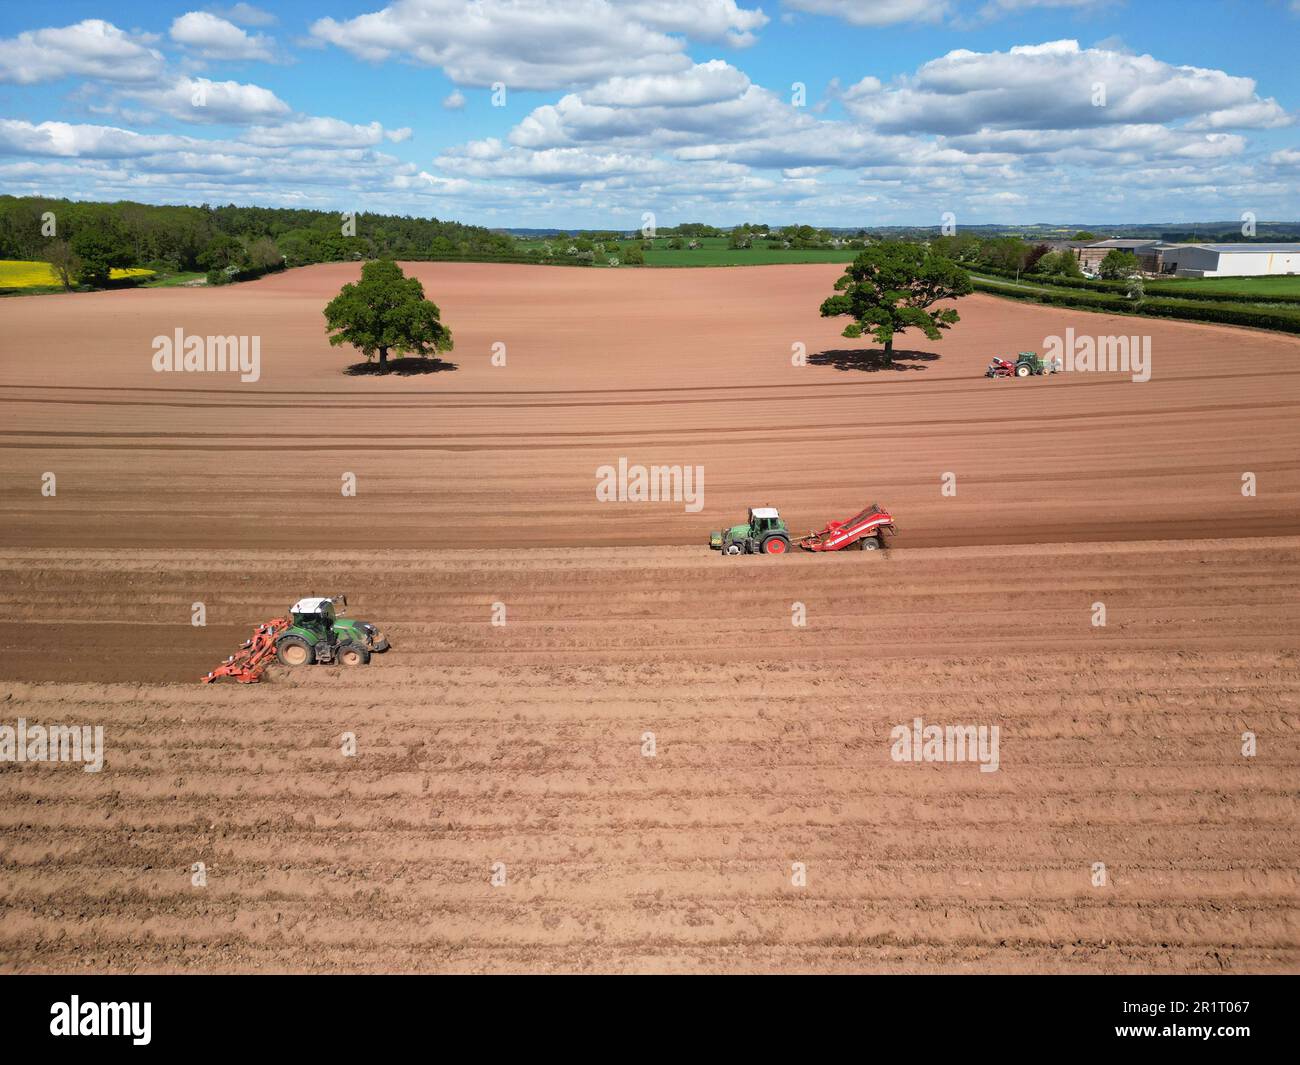 Pembridge, Herefordshire, UK - Monday 15th May 2023 - UK Weather - Farmers take advantage of the good weather and dry conditions to plough fields in preparation for late season potatoes in rural Herefordshire. The forecast is for warm, sunny and dry weather ahead for the next few days with local temperatures up to 20c across much of Britain. Photo Steven May / Alamy Live News Stock Photo